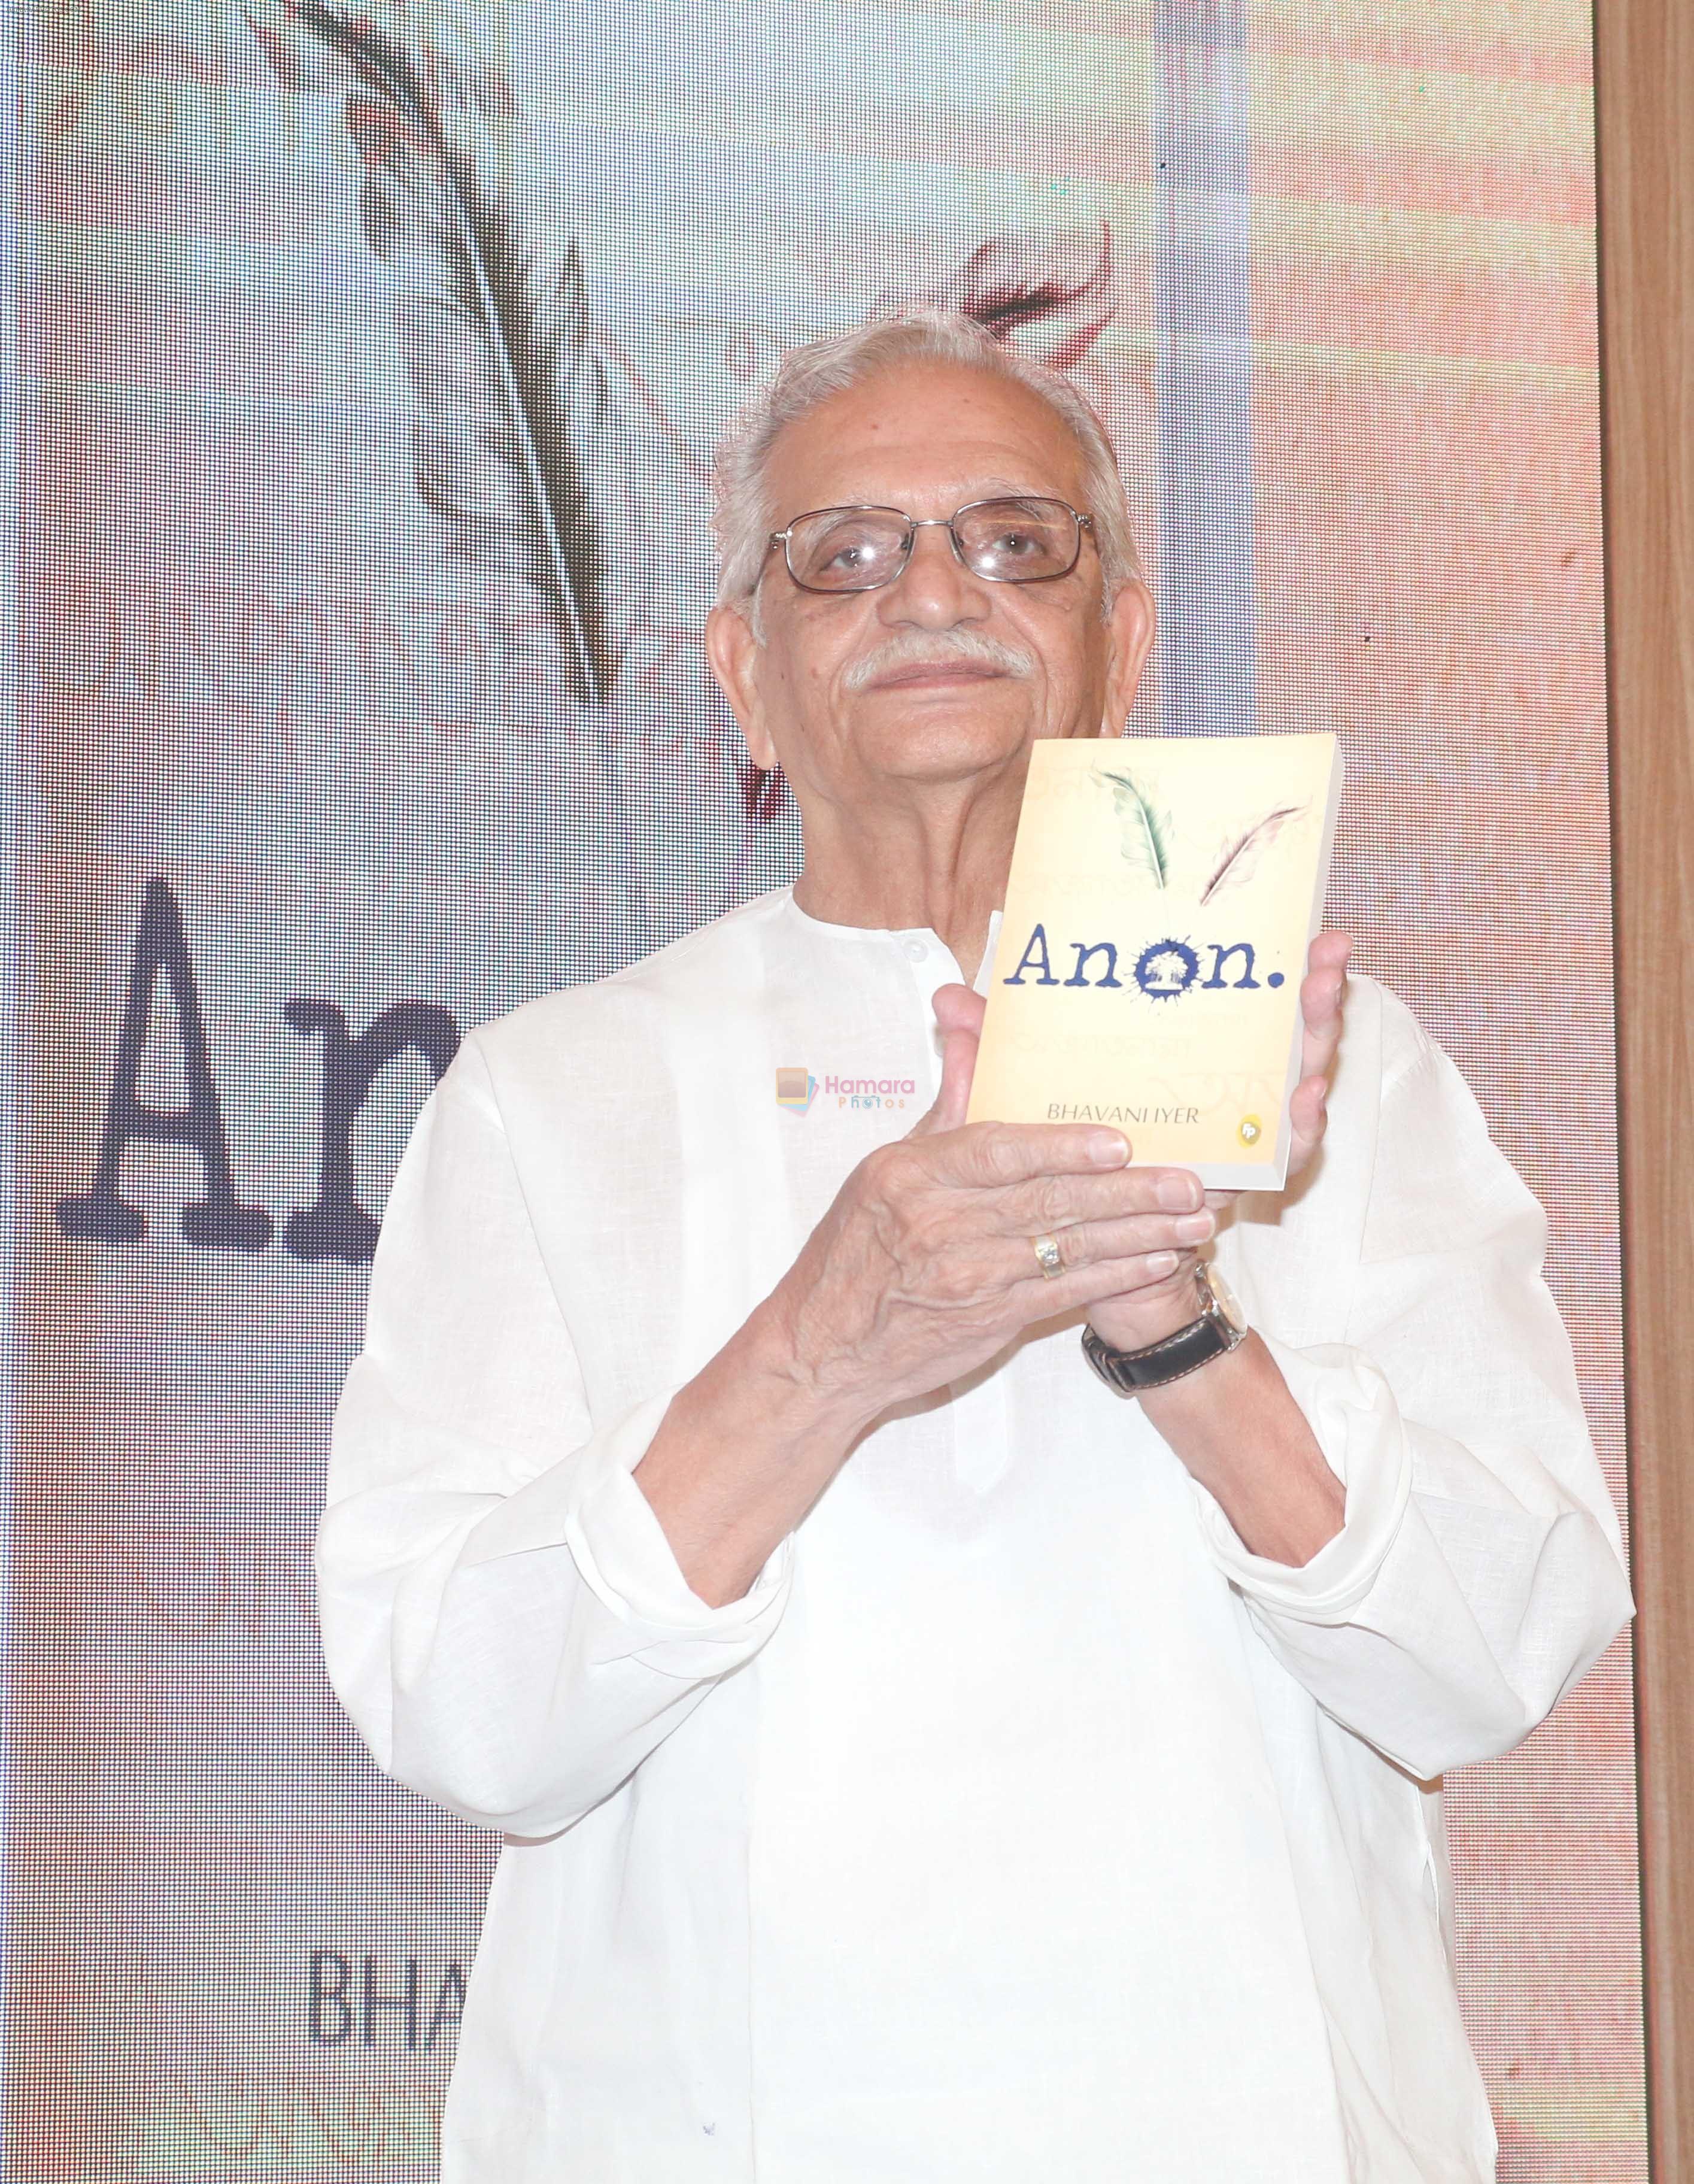 Gulzar Celebrate The Success of Bhavani Iyer Debut Novel _Anon_ at Title Waves bandra on 9th Oct 2018